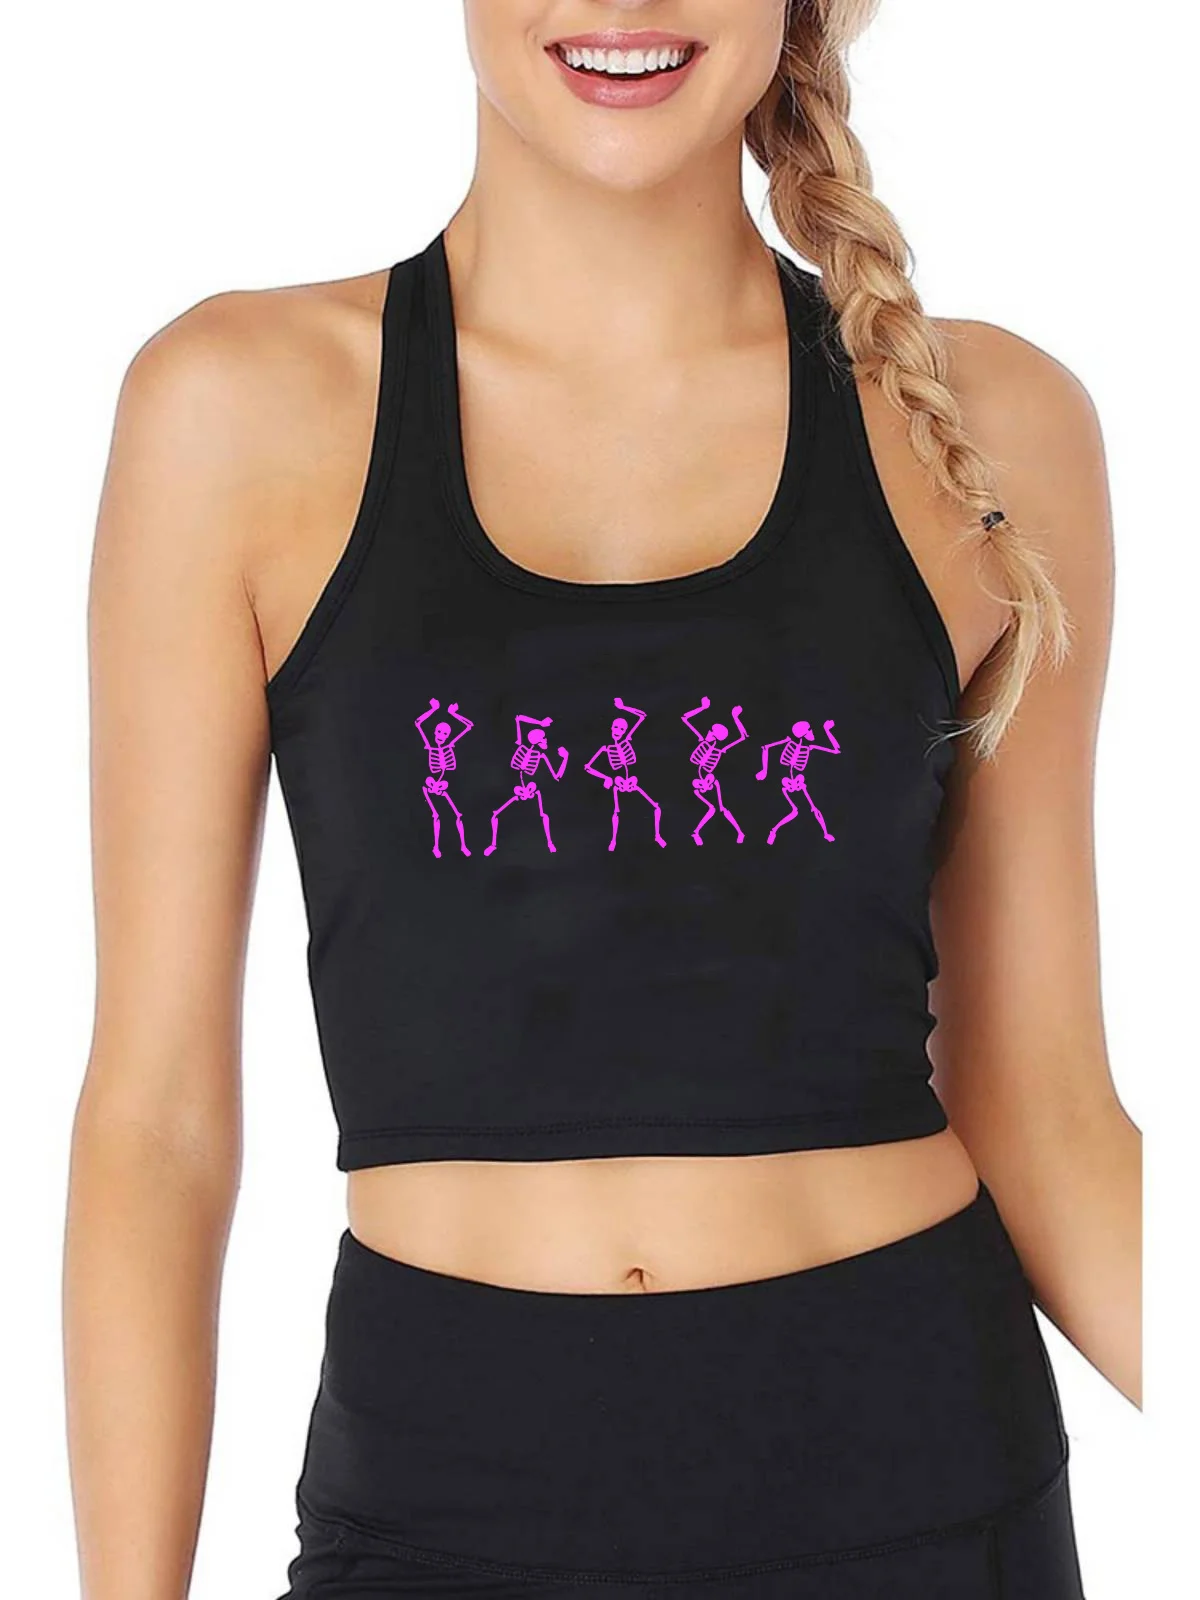 

Pink Spooky Dancing Skeletons Graphic Design Cotton Breathable Sexy Fit Crop Top Trend Gothic Sports Fitness Training Tank Tops